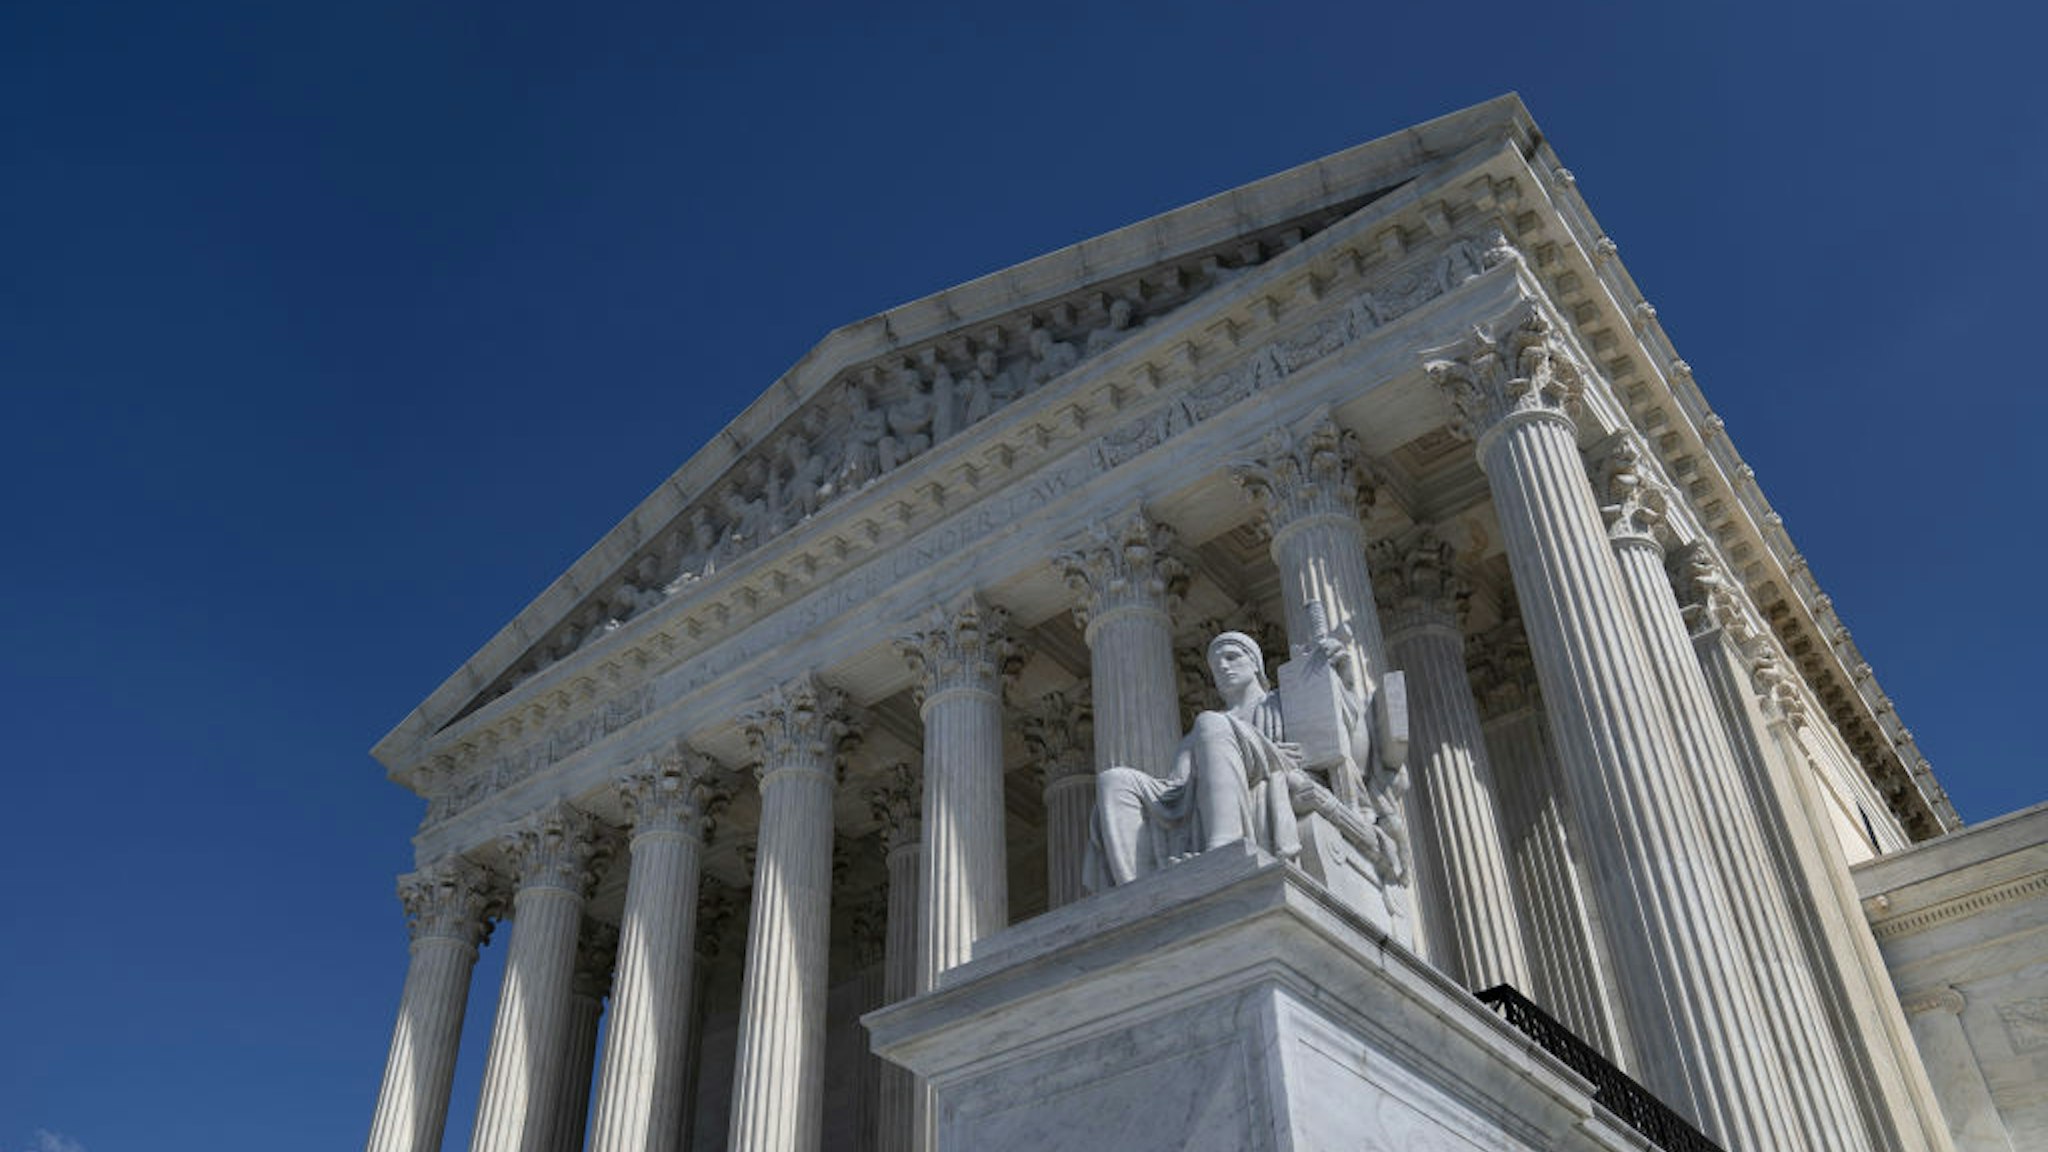 The U.S. Supreme Court stands in Washington, D.C., U.S. on Tuesday, Oct. 6, 2020. Alphabet Inc.'s Google and Oracle Corp. will face off in the U.S. Supreme Court on Wednesday in a multibillion-dollar copyright dispute with sweeping implications for technology and media companies worldwide.